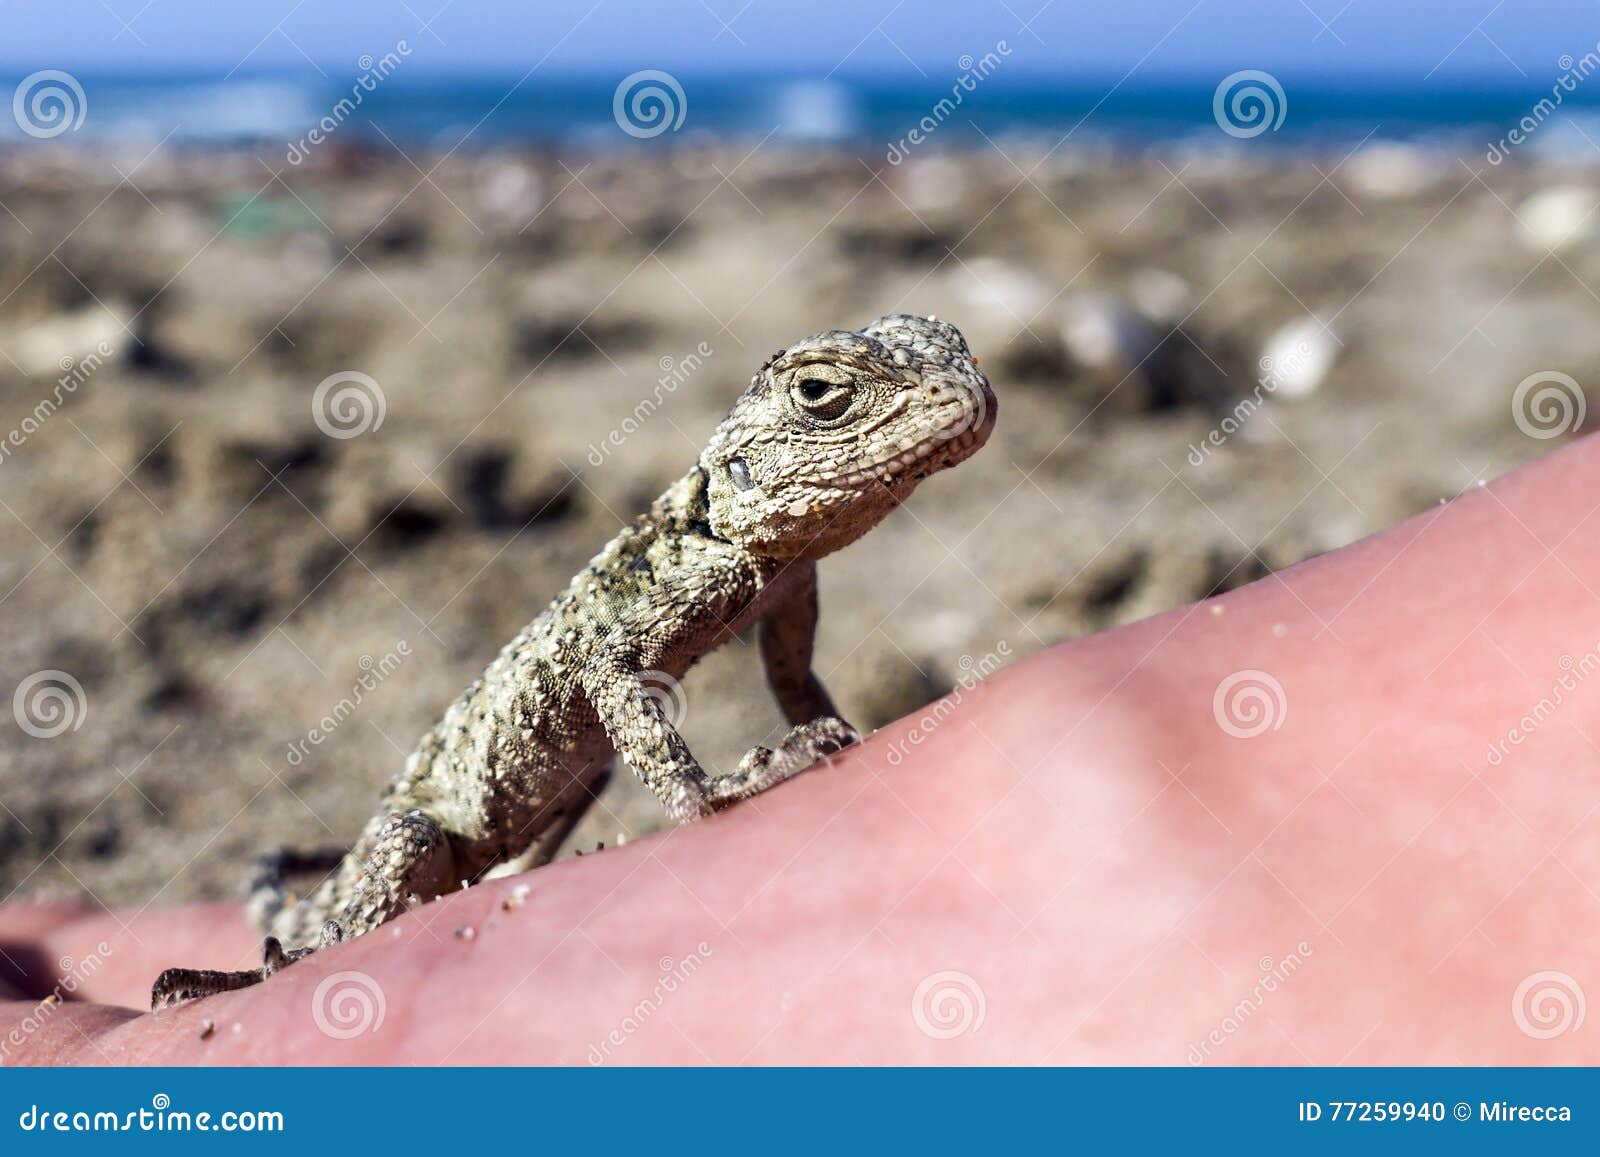 small saurian (close-up) on the sea shore